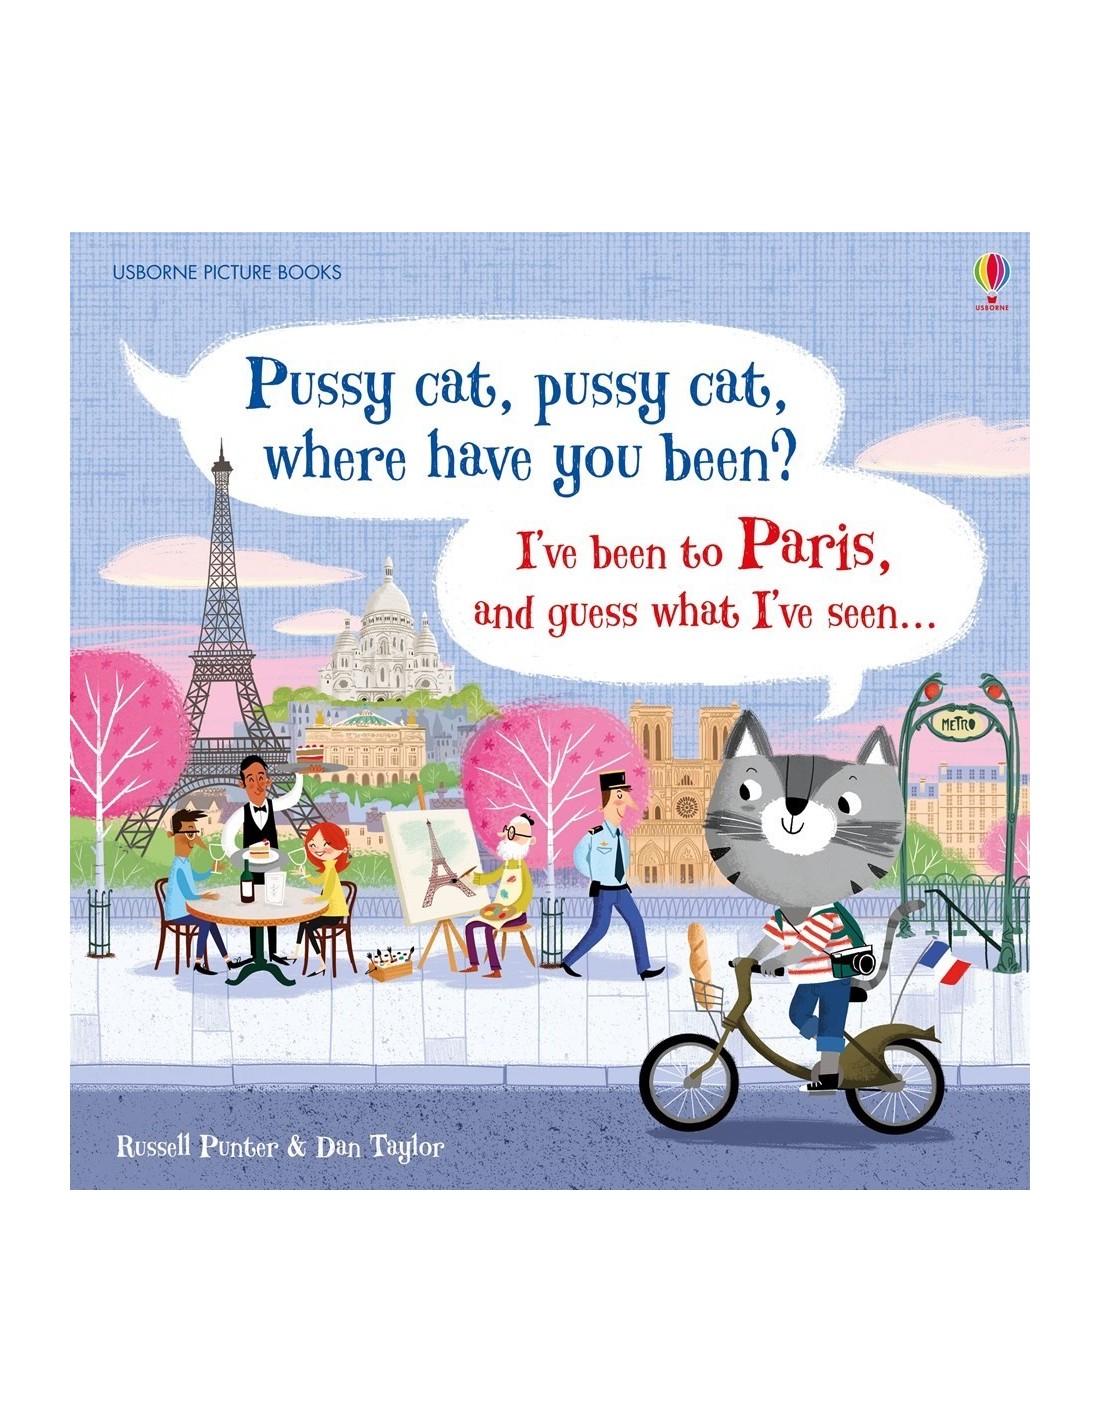 Pussy cat, pussy cat, where have you been? I've been to Paris and guess what I've seen...